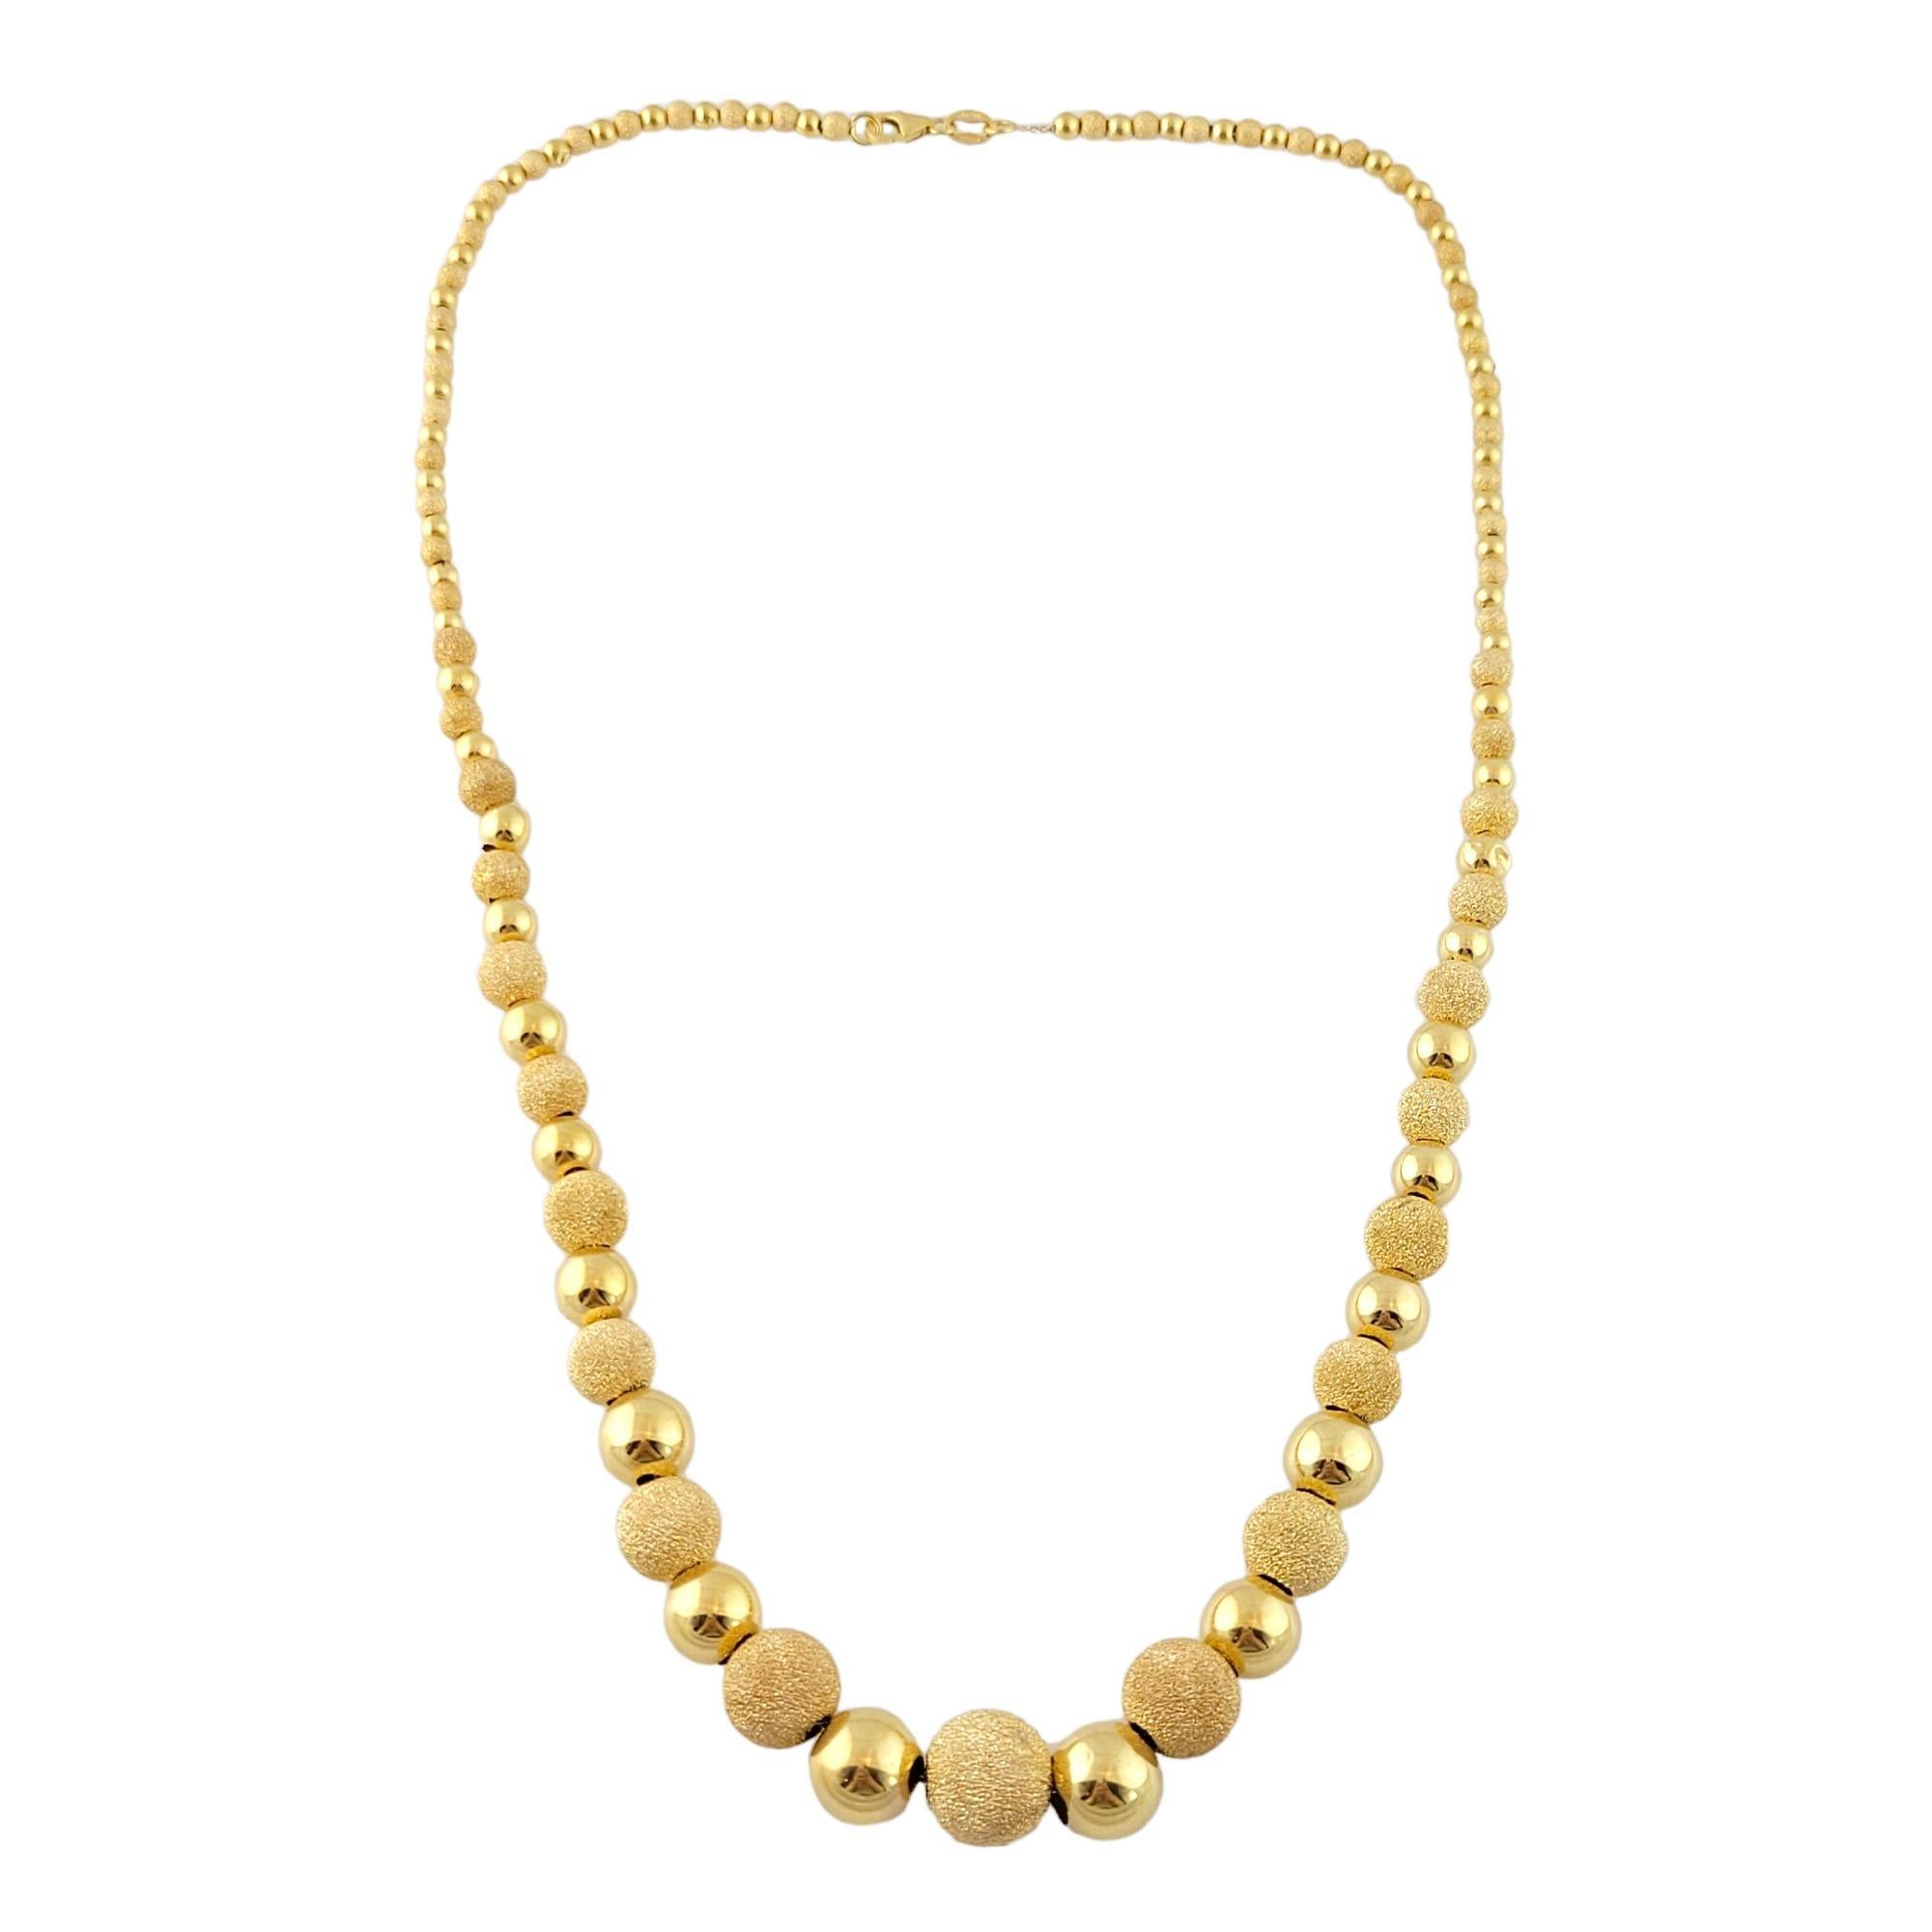 Vintage 14K Yellow Gold Textured Ball Necklace

This gorgeous 14K gold necklace is decorated with textured, gold, sparkly balls around the chain!

Size: 17.5